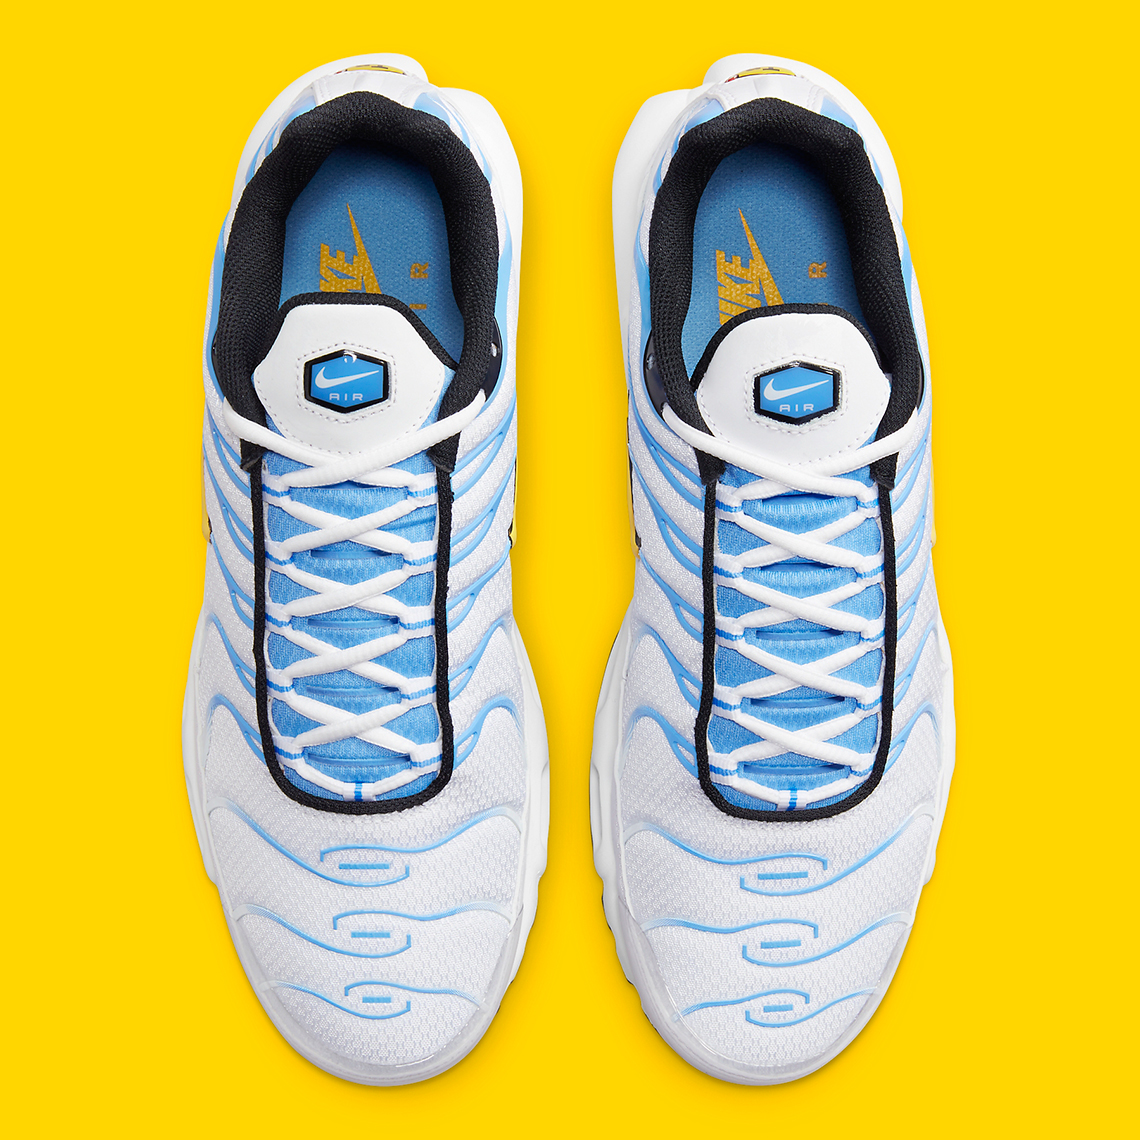 nike air max 2014 price in india today 2019 White University Blue Yellow Dm0032 101 7